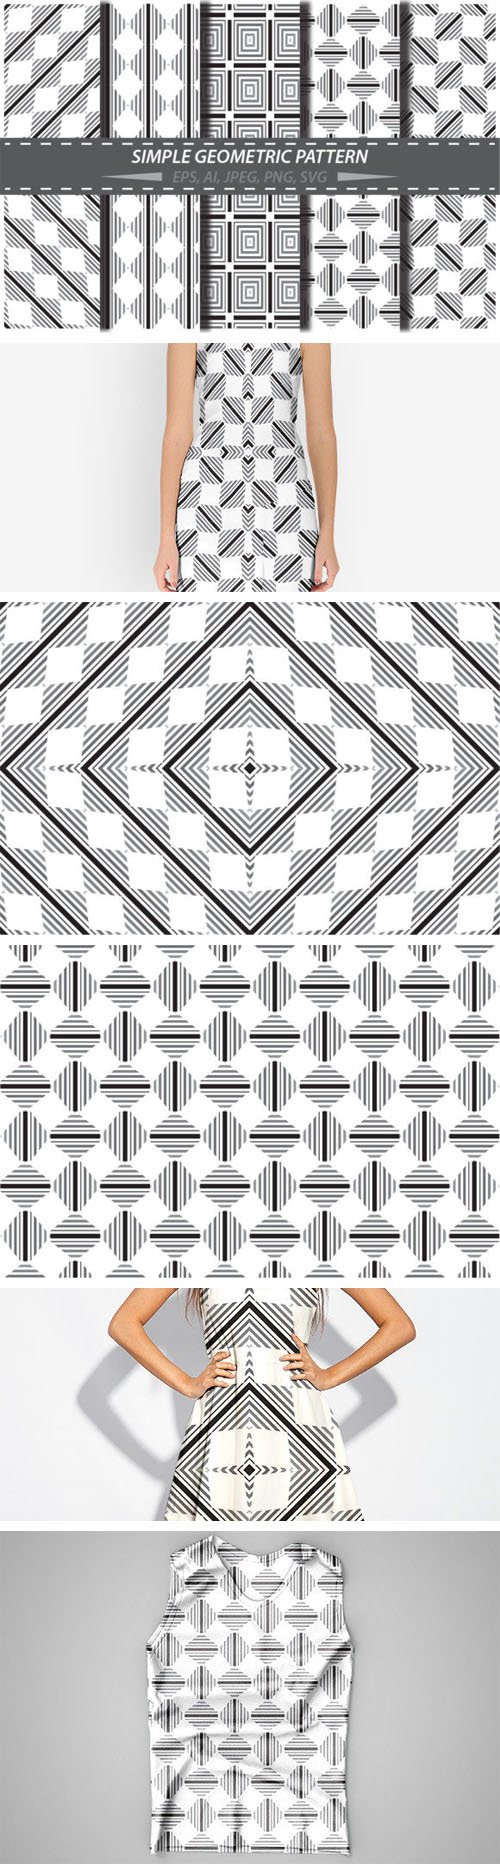 Geometric Patterns - Vector Shapes and Backgrounds